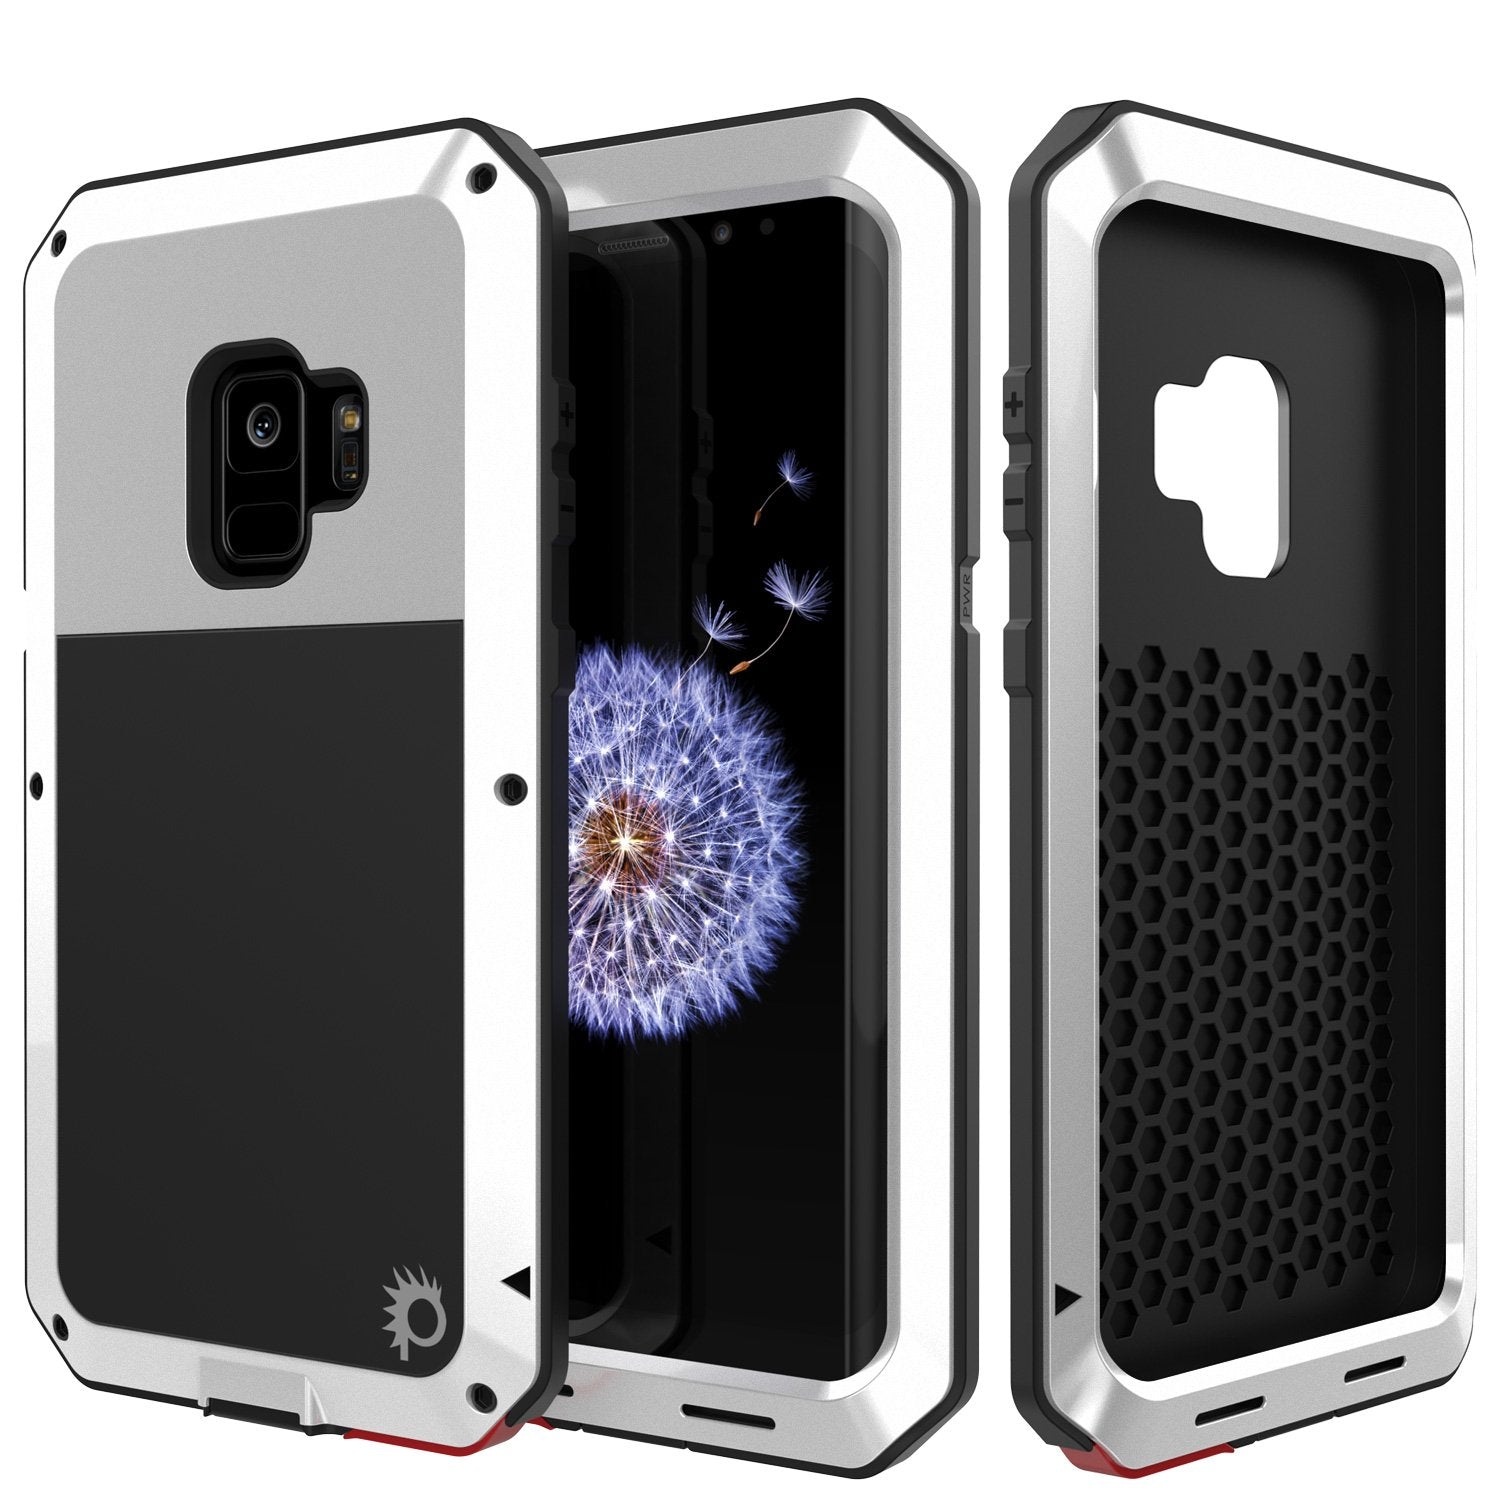 Galaxy S9 Metal Case, Heavy Duty Military Grade Rugged Armor Cover [shock proof] Hybrid Full Body Hard Aluminum & TPU Design [non slip] W/ Prime Drop Protection for Samsung Galaxy S9 [White]